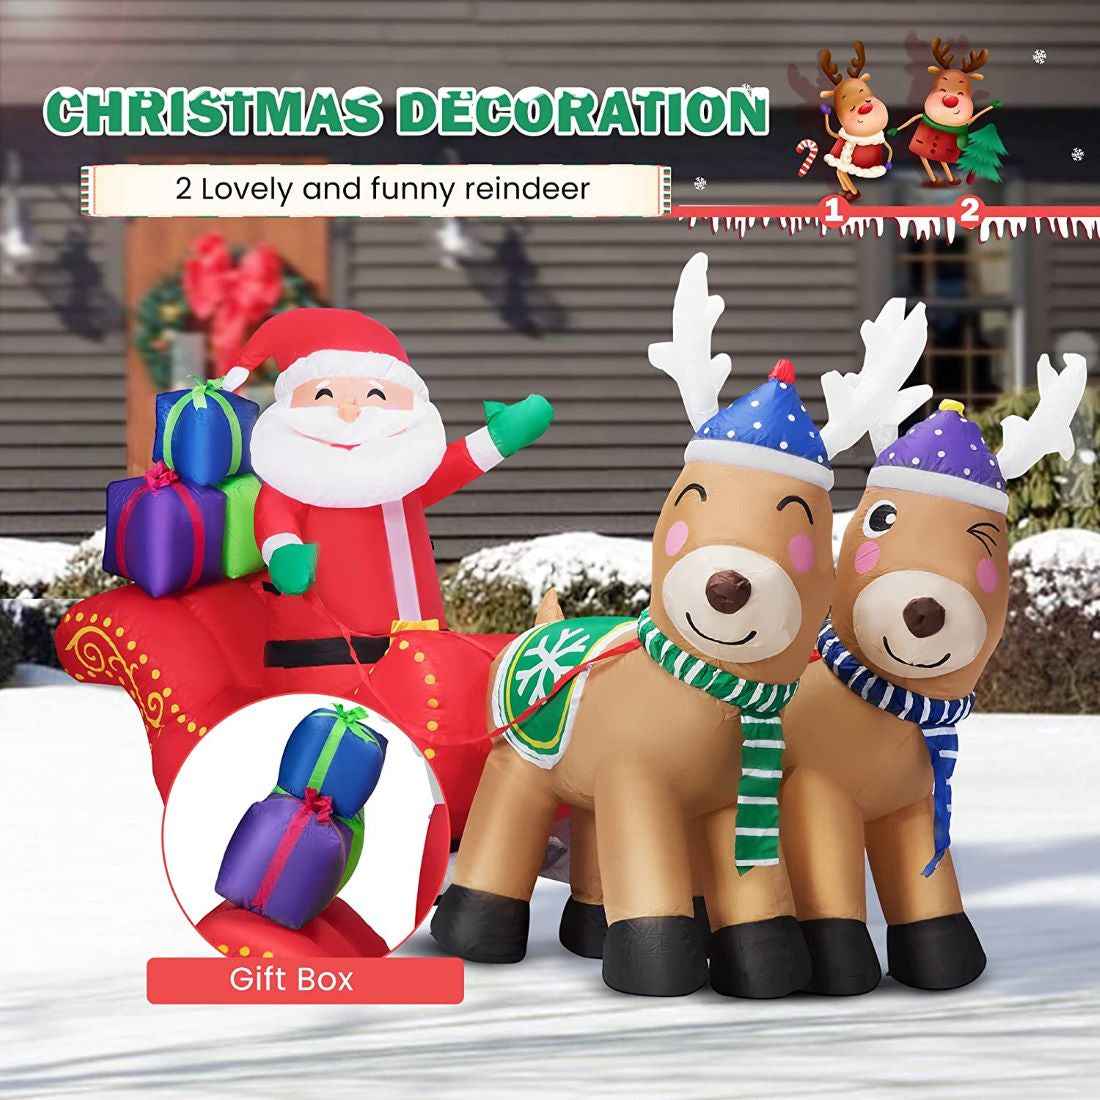 VIVOHOME 7ft Long Christmas Inflatable LED Lighted Santa on Red Sleigh with Reindeers and Gift Boxes Blow up Outdoor Yard Decoration